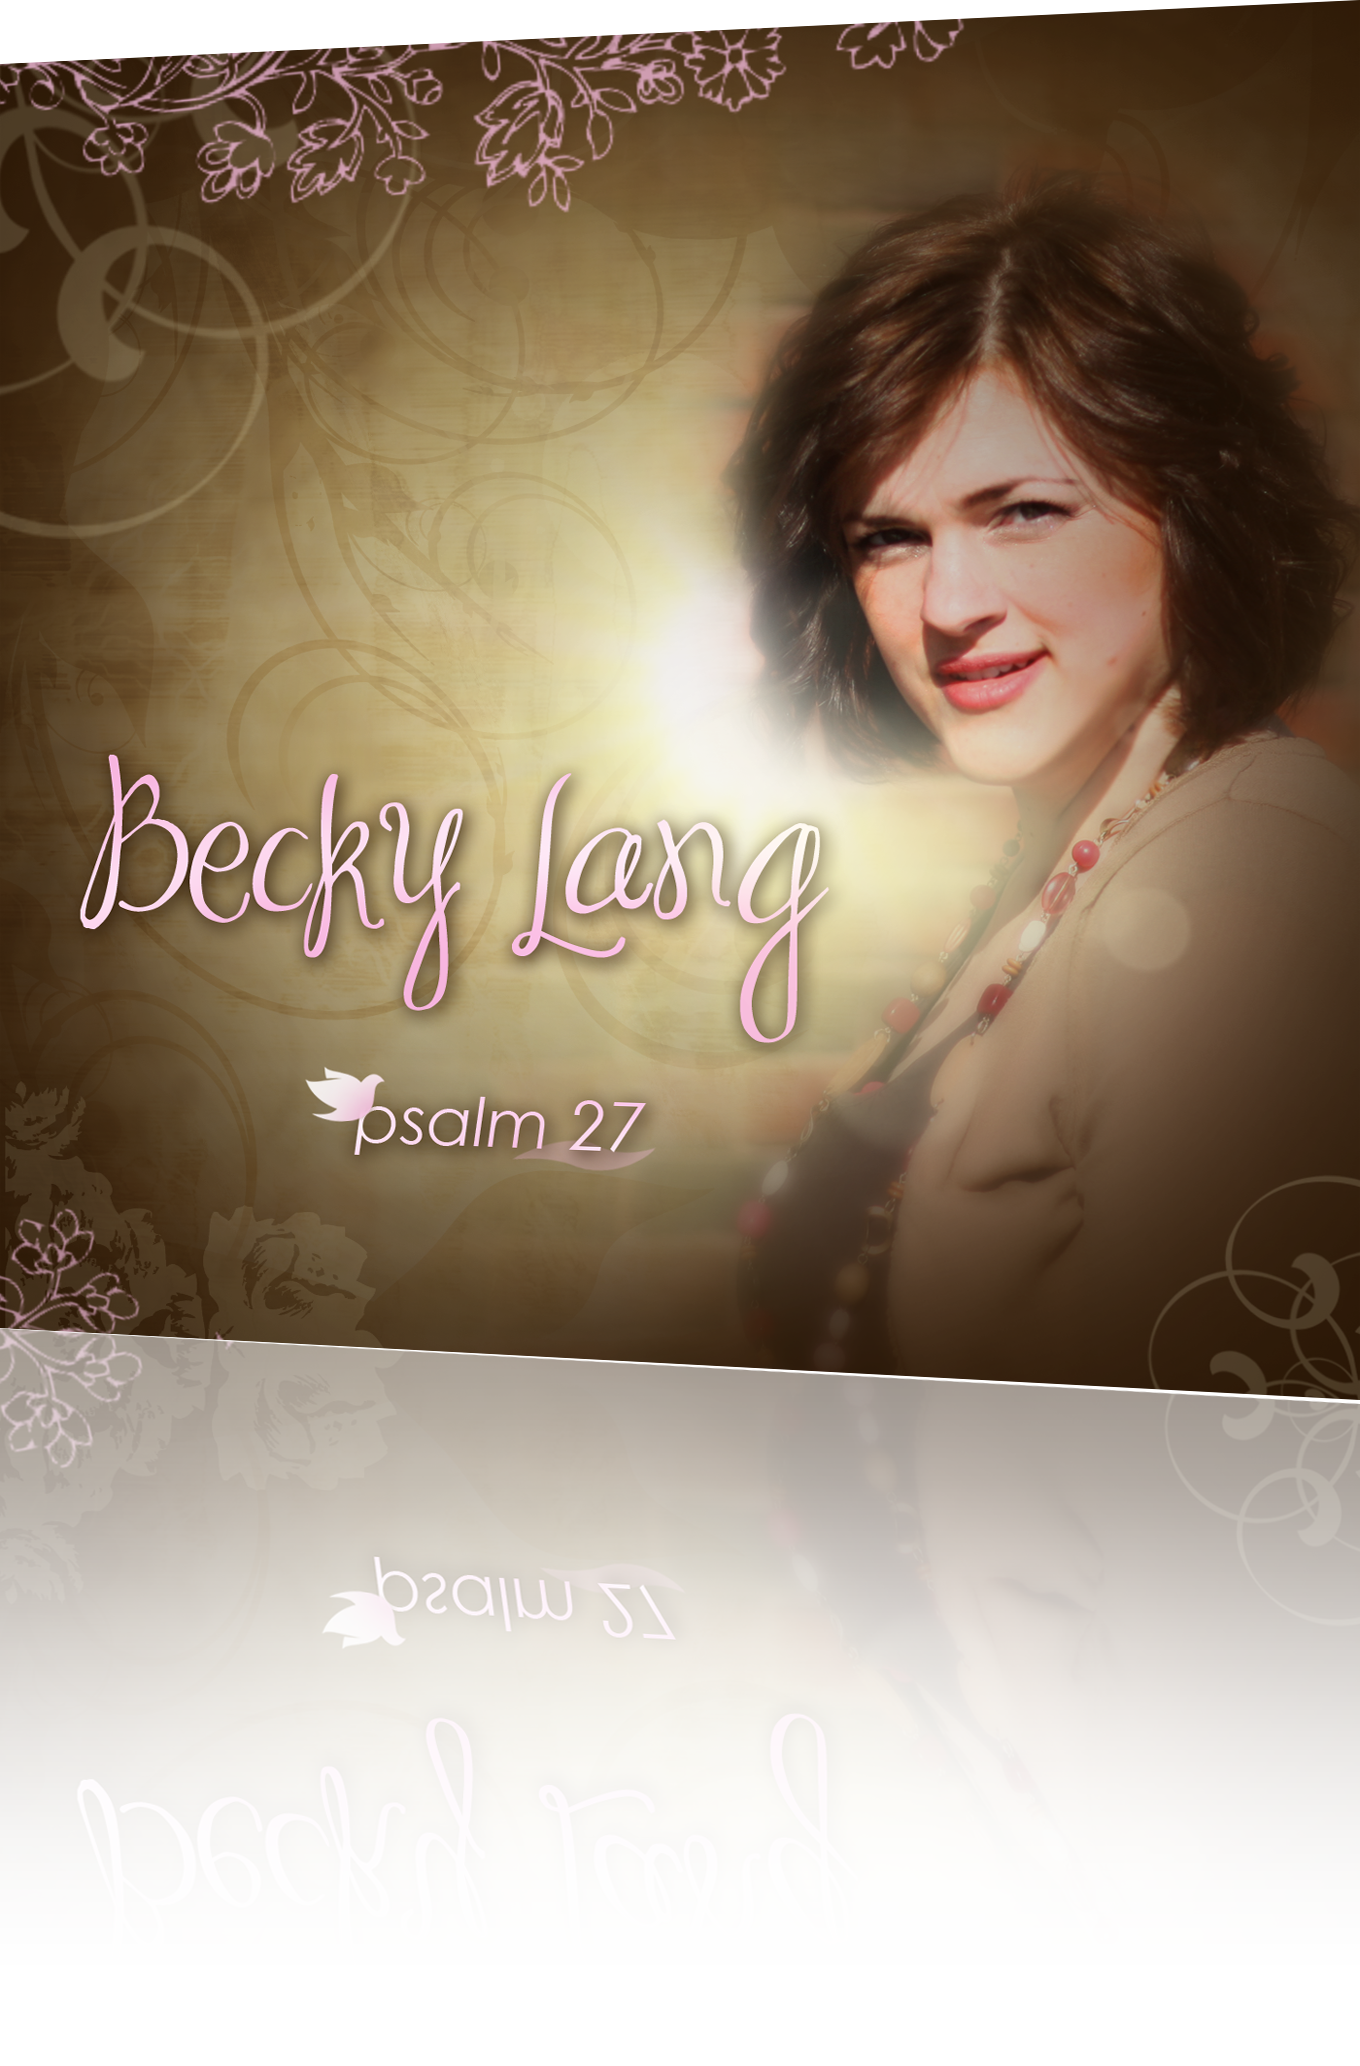 becky-lang-cd-cover-reflection2.png